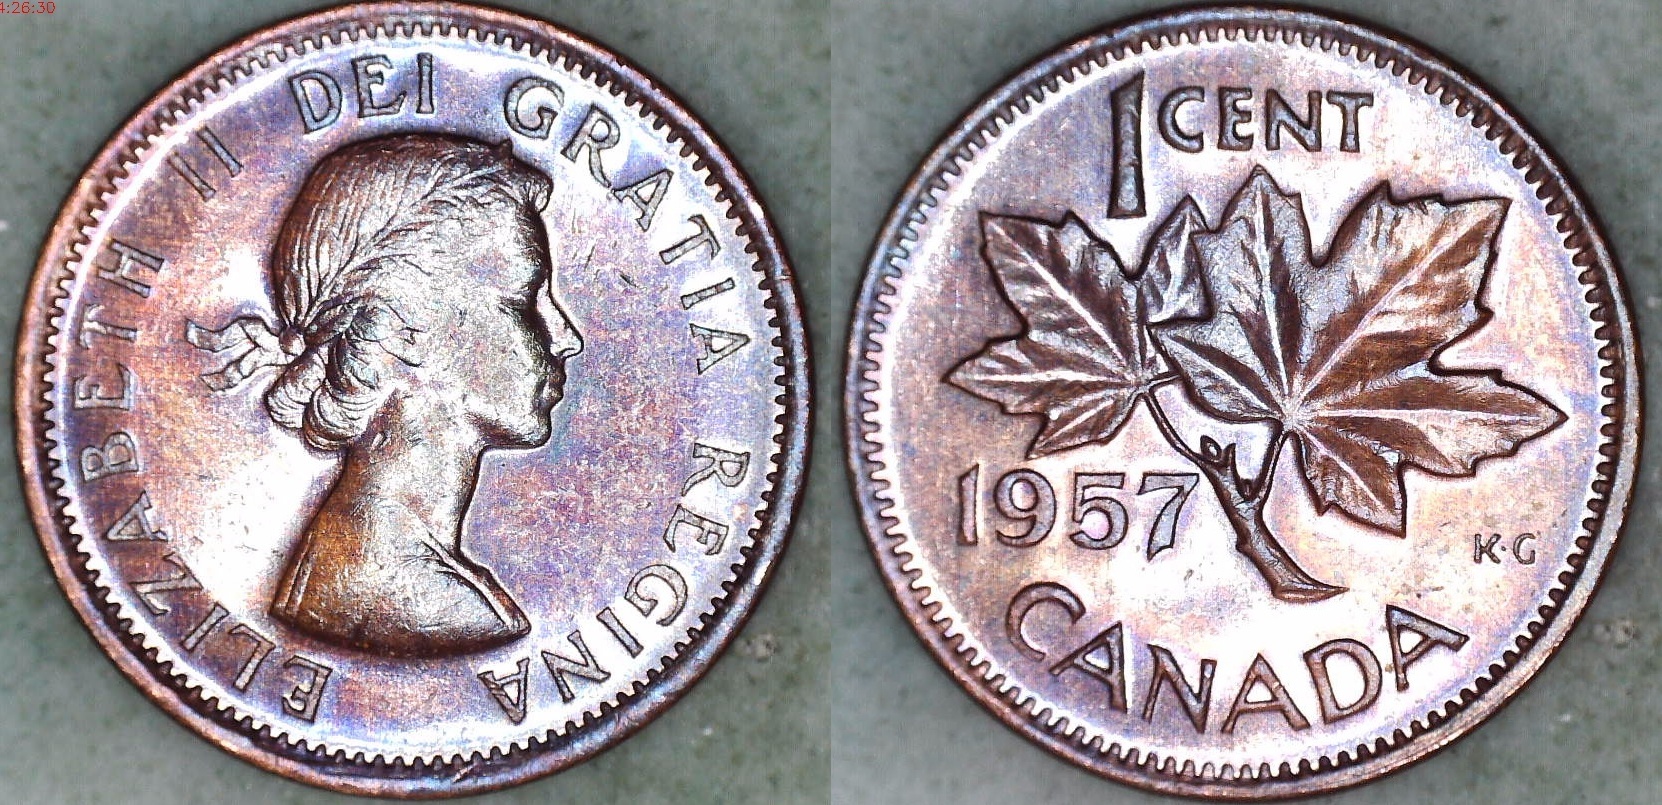 1957 Can Toned.jpg